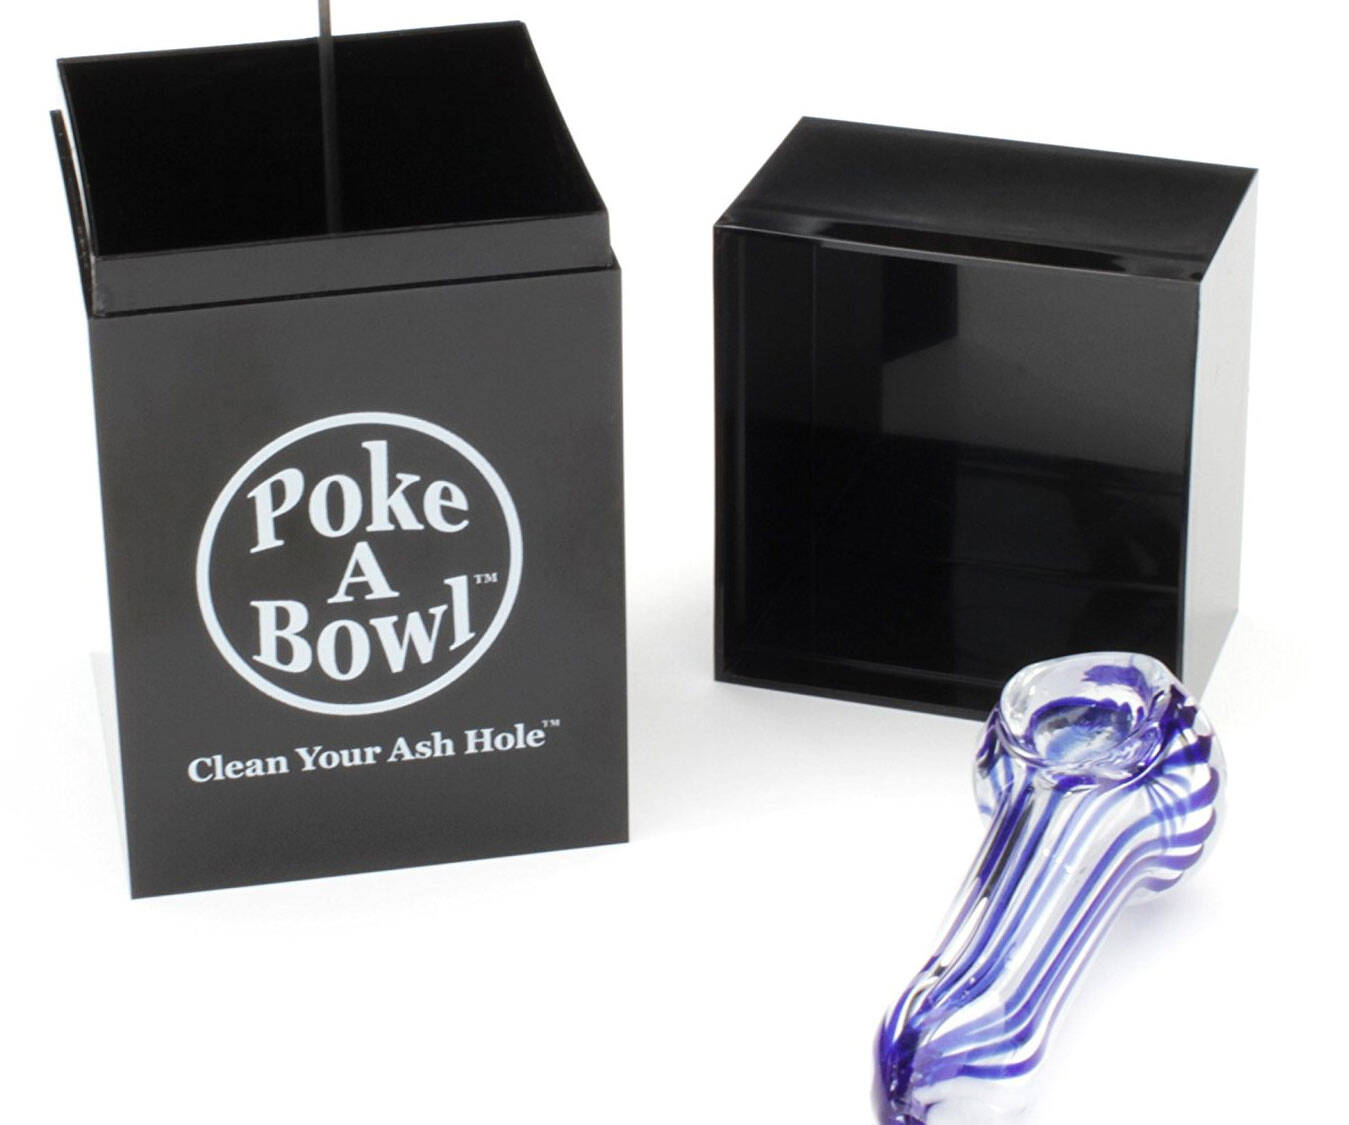 Poke A Bowl Clean Your Ash Hole Ashtray - //coolthings.us